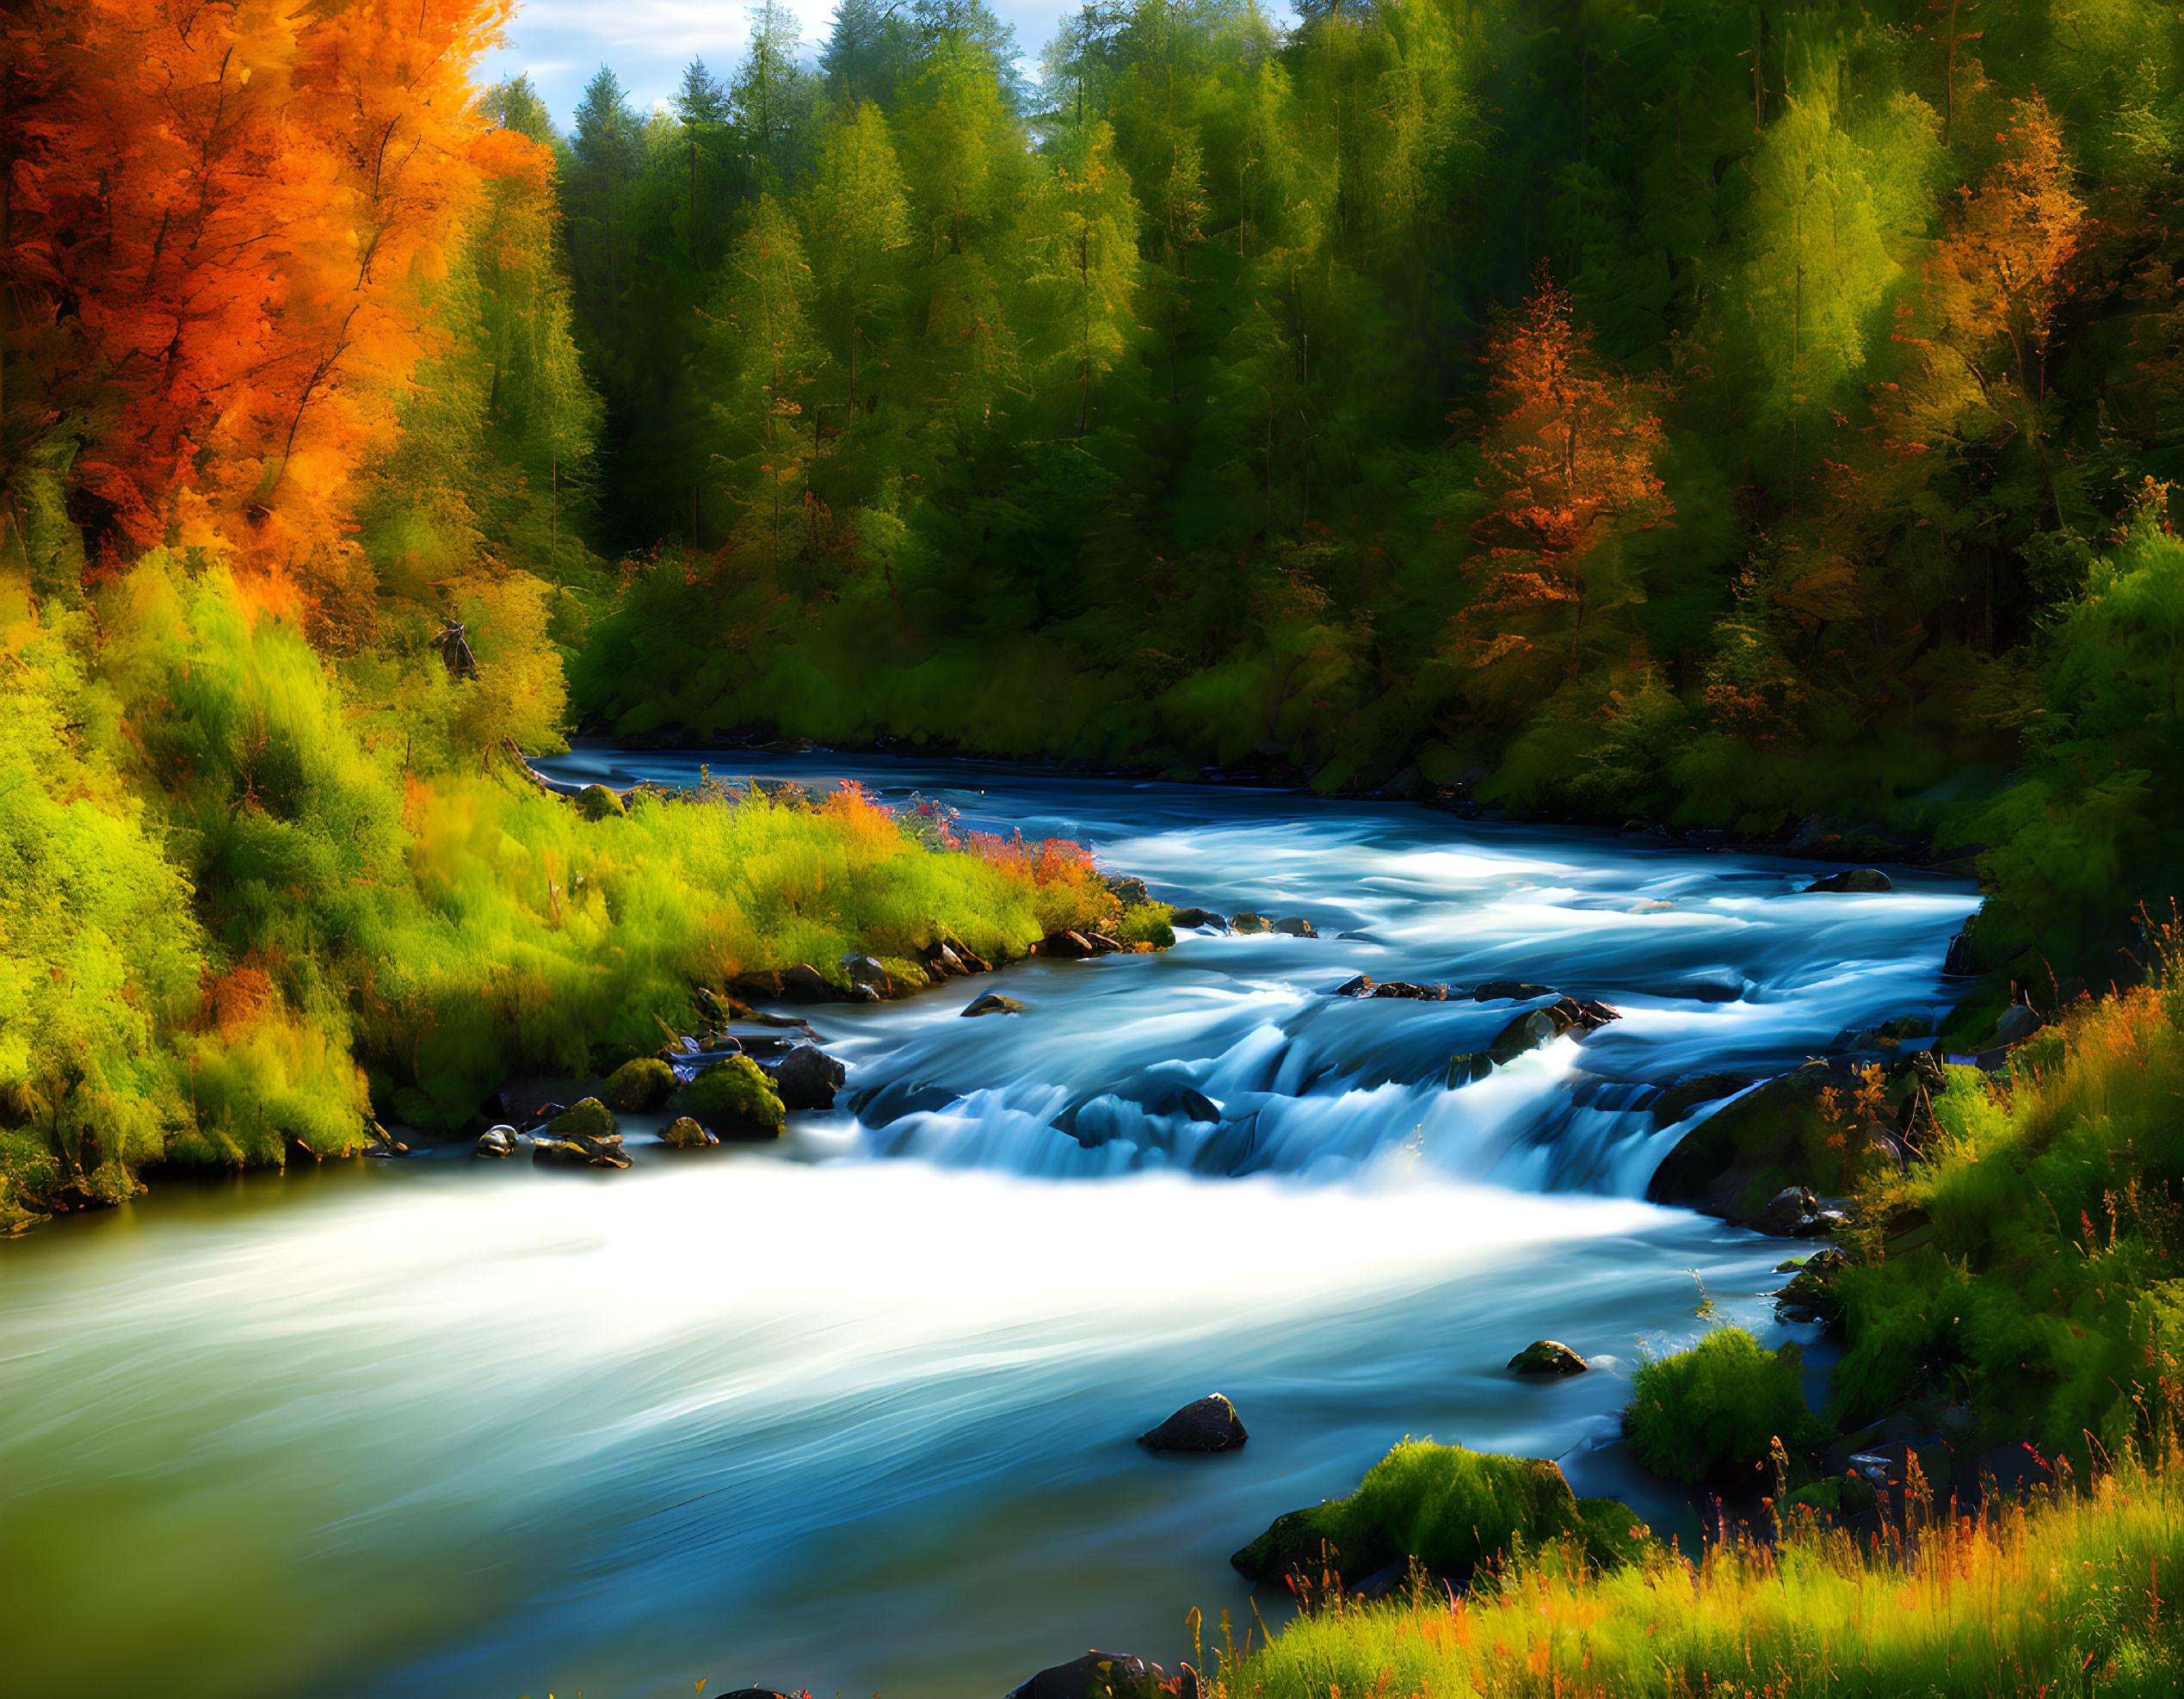 Scenic forest with vibrant autumn colors and flowing cascade